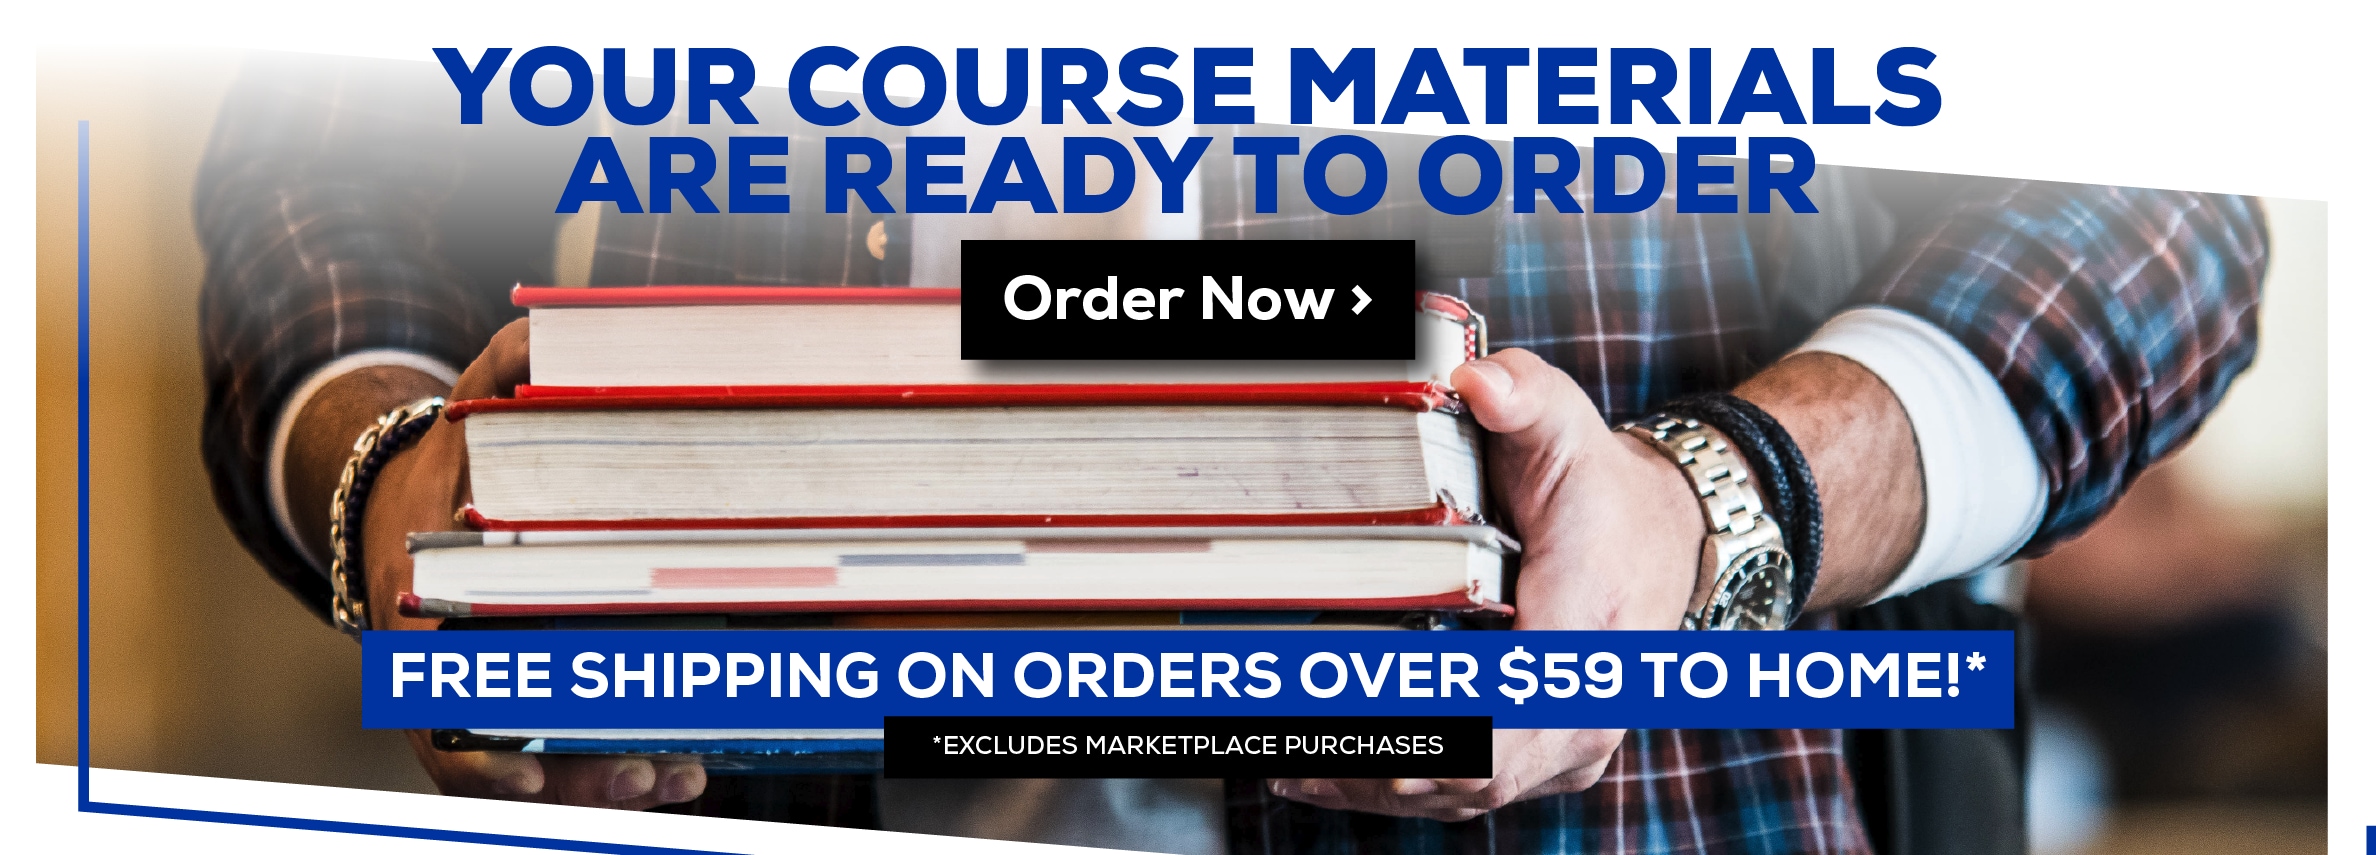 Your Course Materials are Ready to Order. Order Now. Free shipping on orders over $59 to home! *Excludes marketplace purchases.